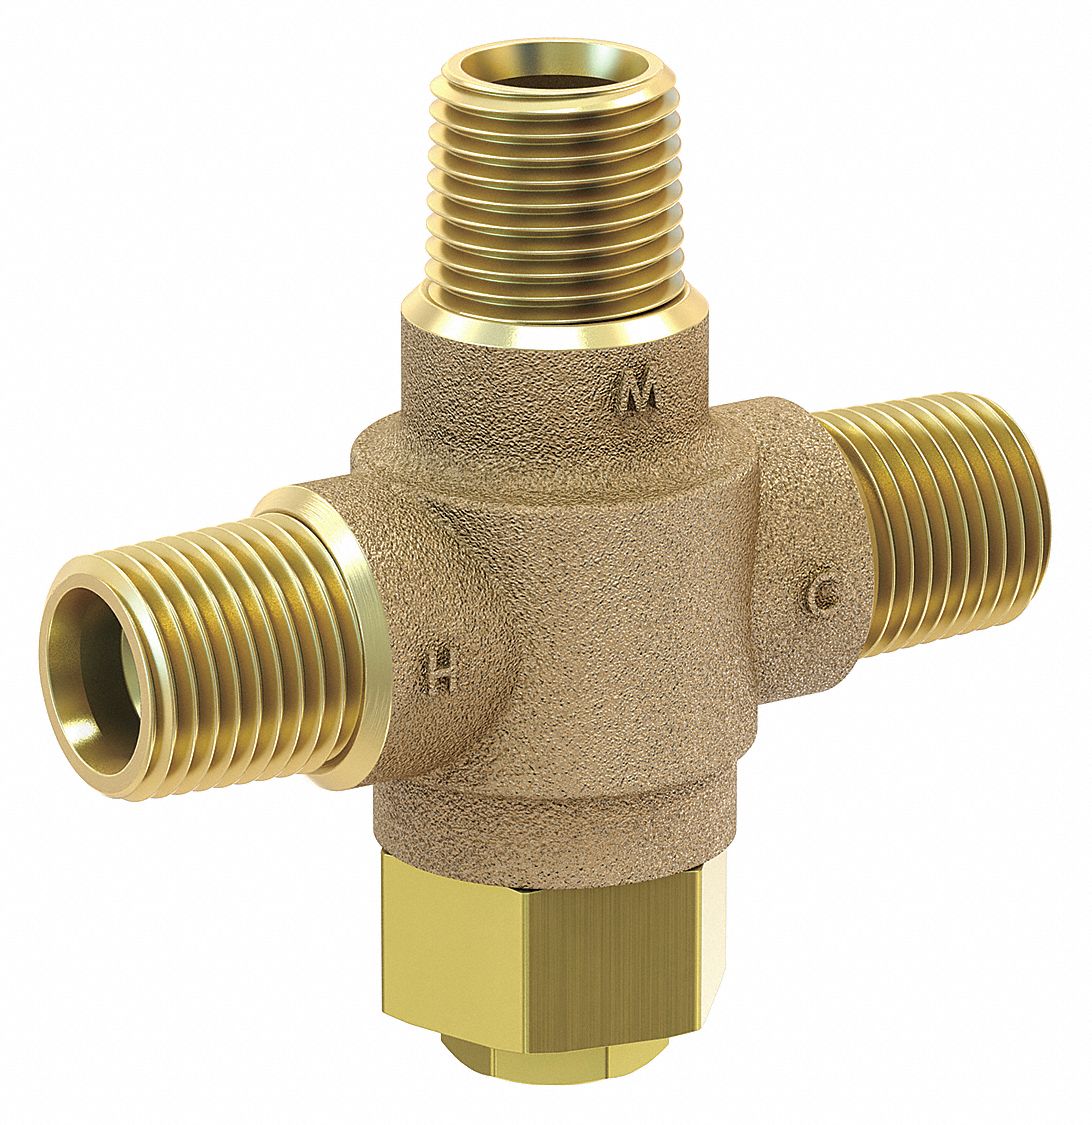 Tempering Valve: Brass, 4.5 gpm Flow Rate, NPT Inlet, NPT Outlet, 1/2 in Inlet Size